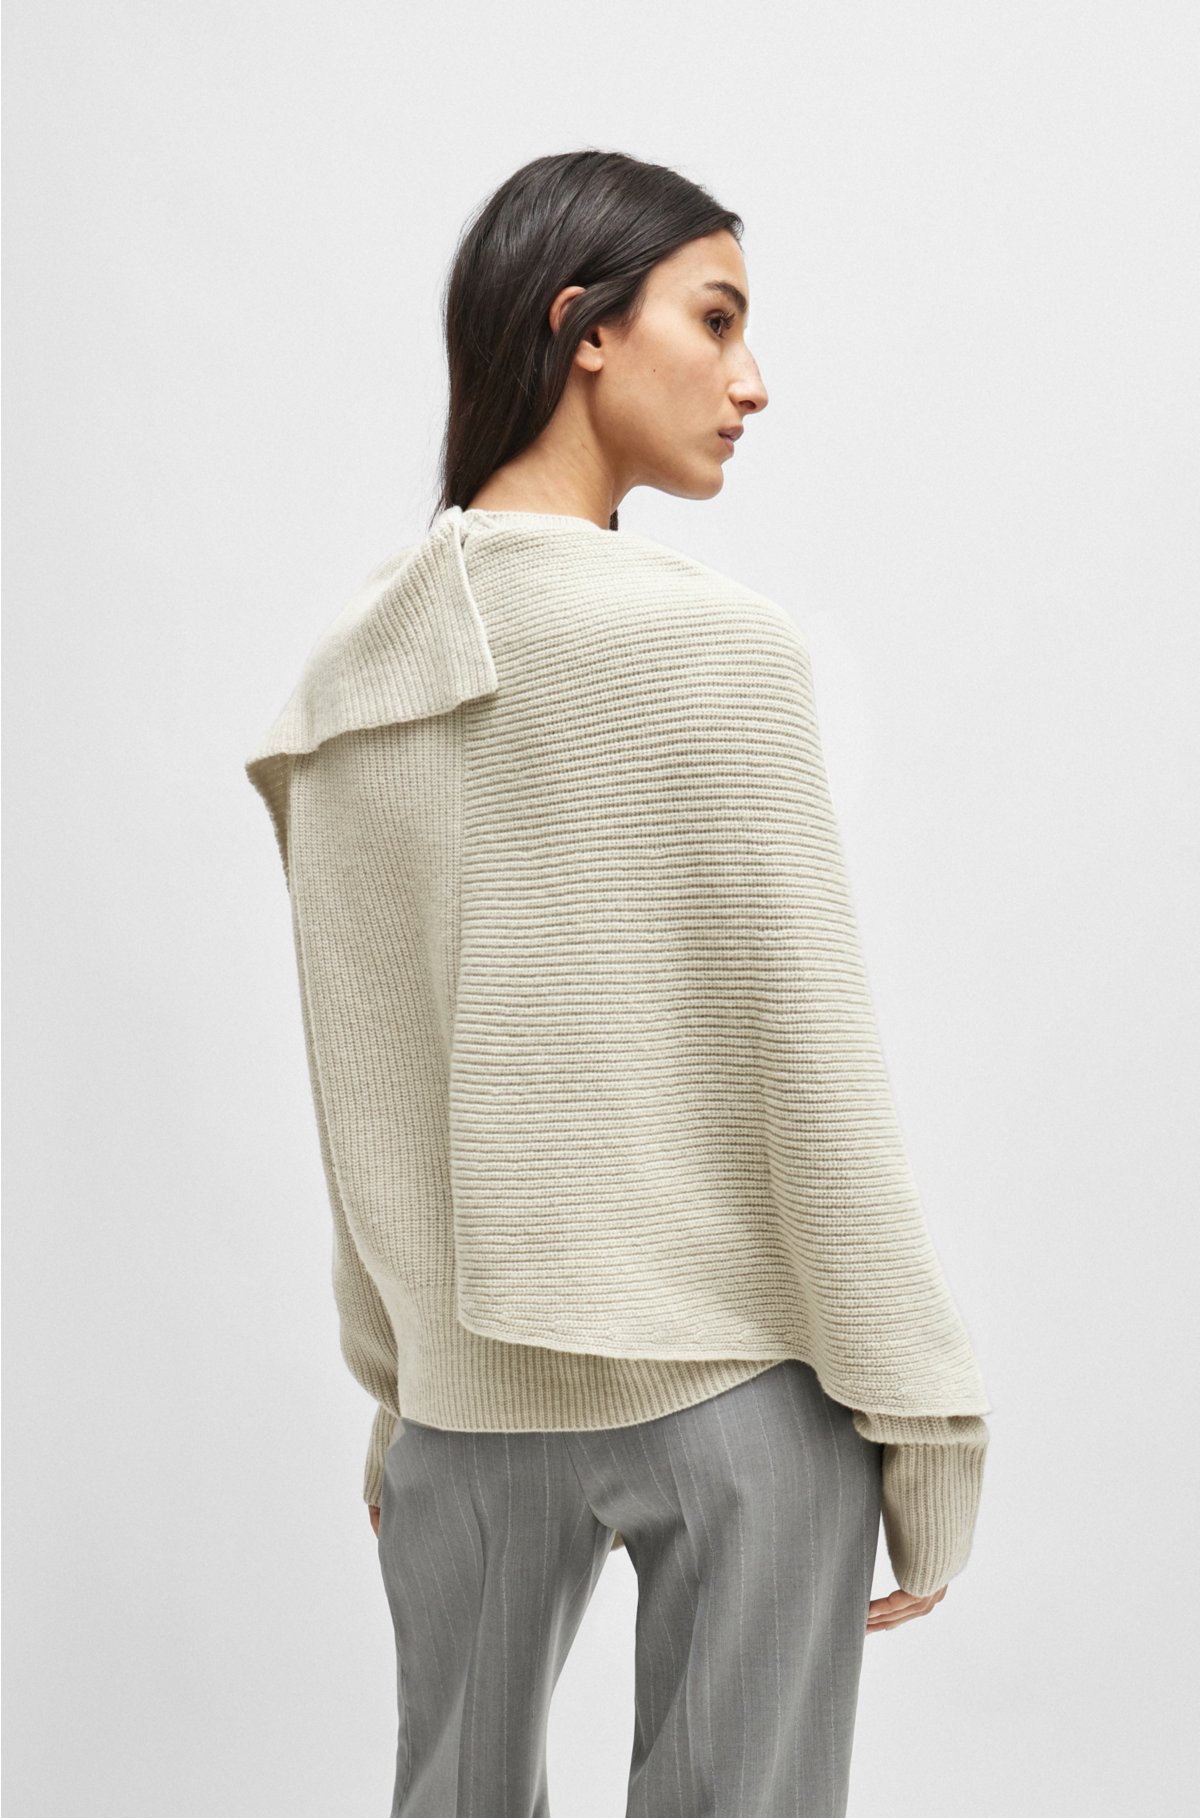 NAOMI x BOSS drape-detail sweater in wool and cashmere, White